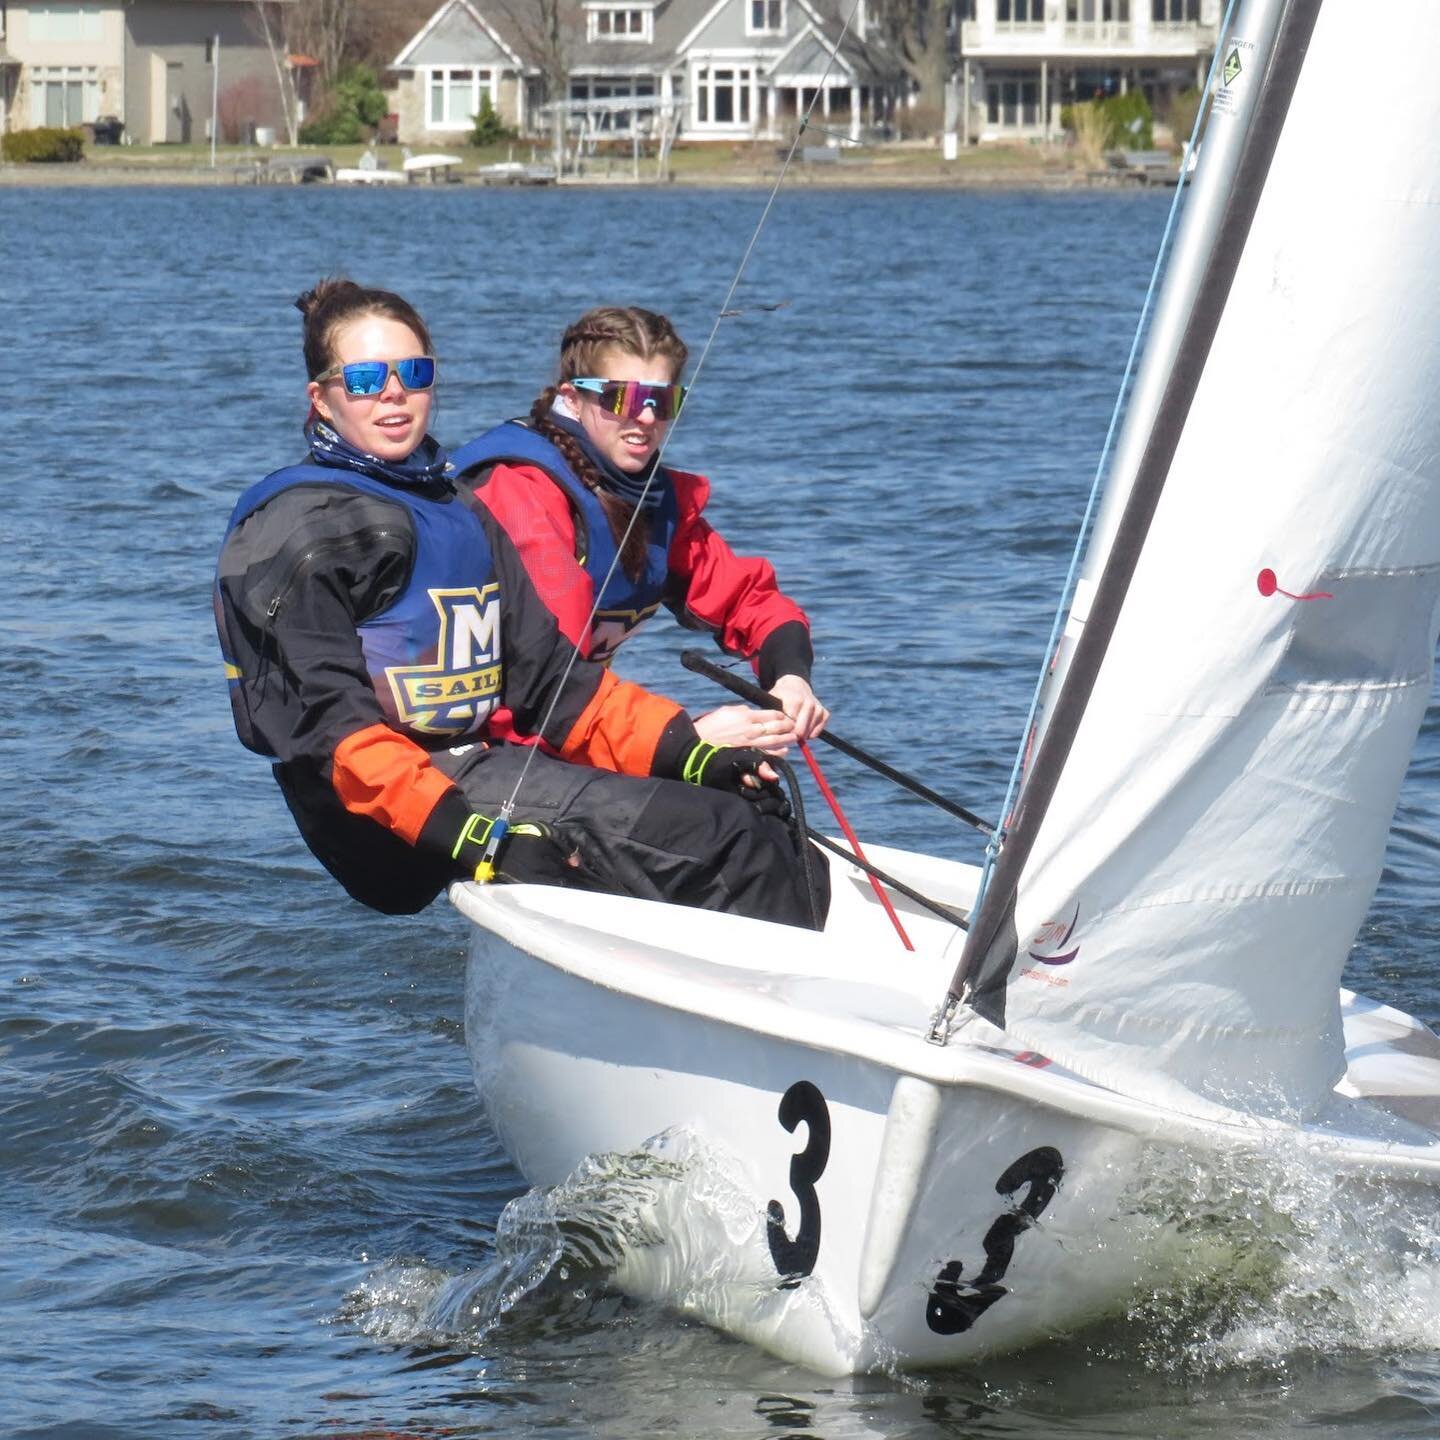 Last weekend, we sent five of our female sailors to compete at the MCSA Women&rsquo;s Fleet Race hosted by @uofmsailing. Marquette placed 5th overall, with our A fleet in 5th and B fleet in 6th. Thanks to the University of Michigan for hosting! #MUST